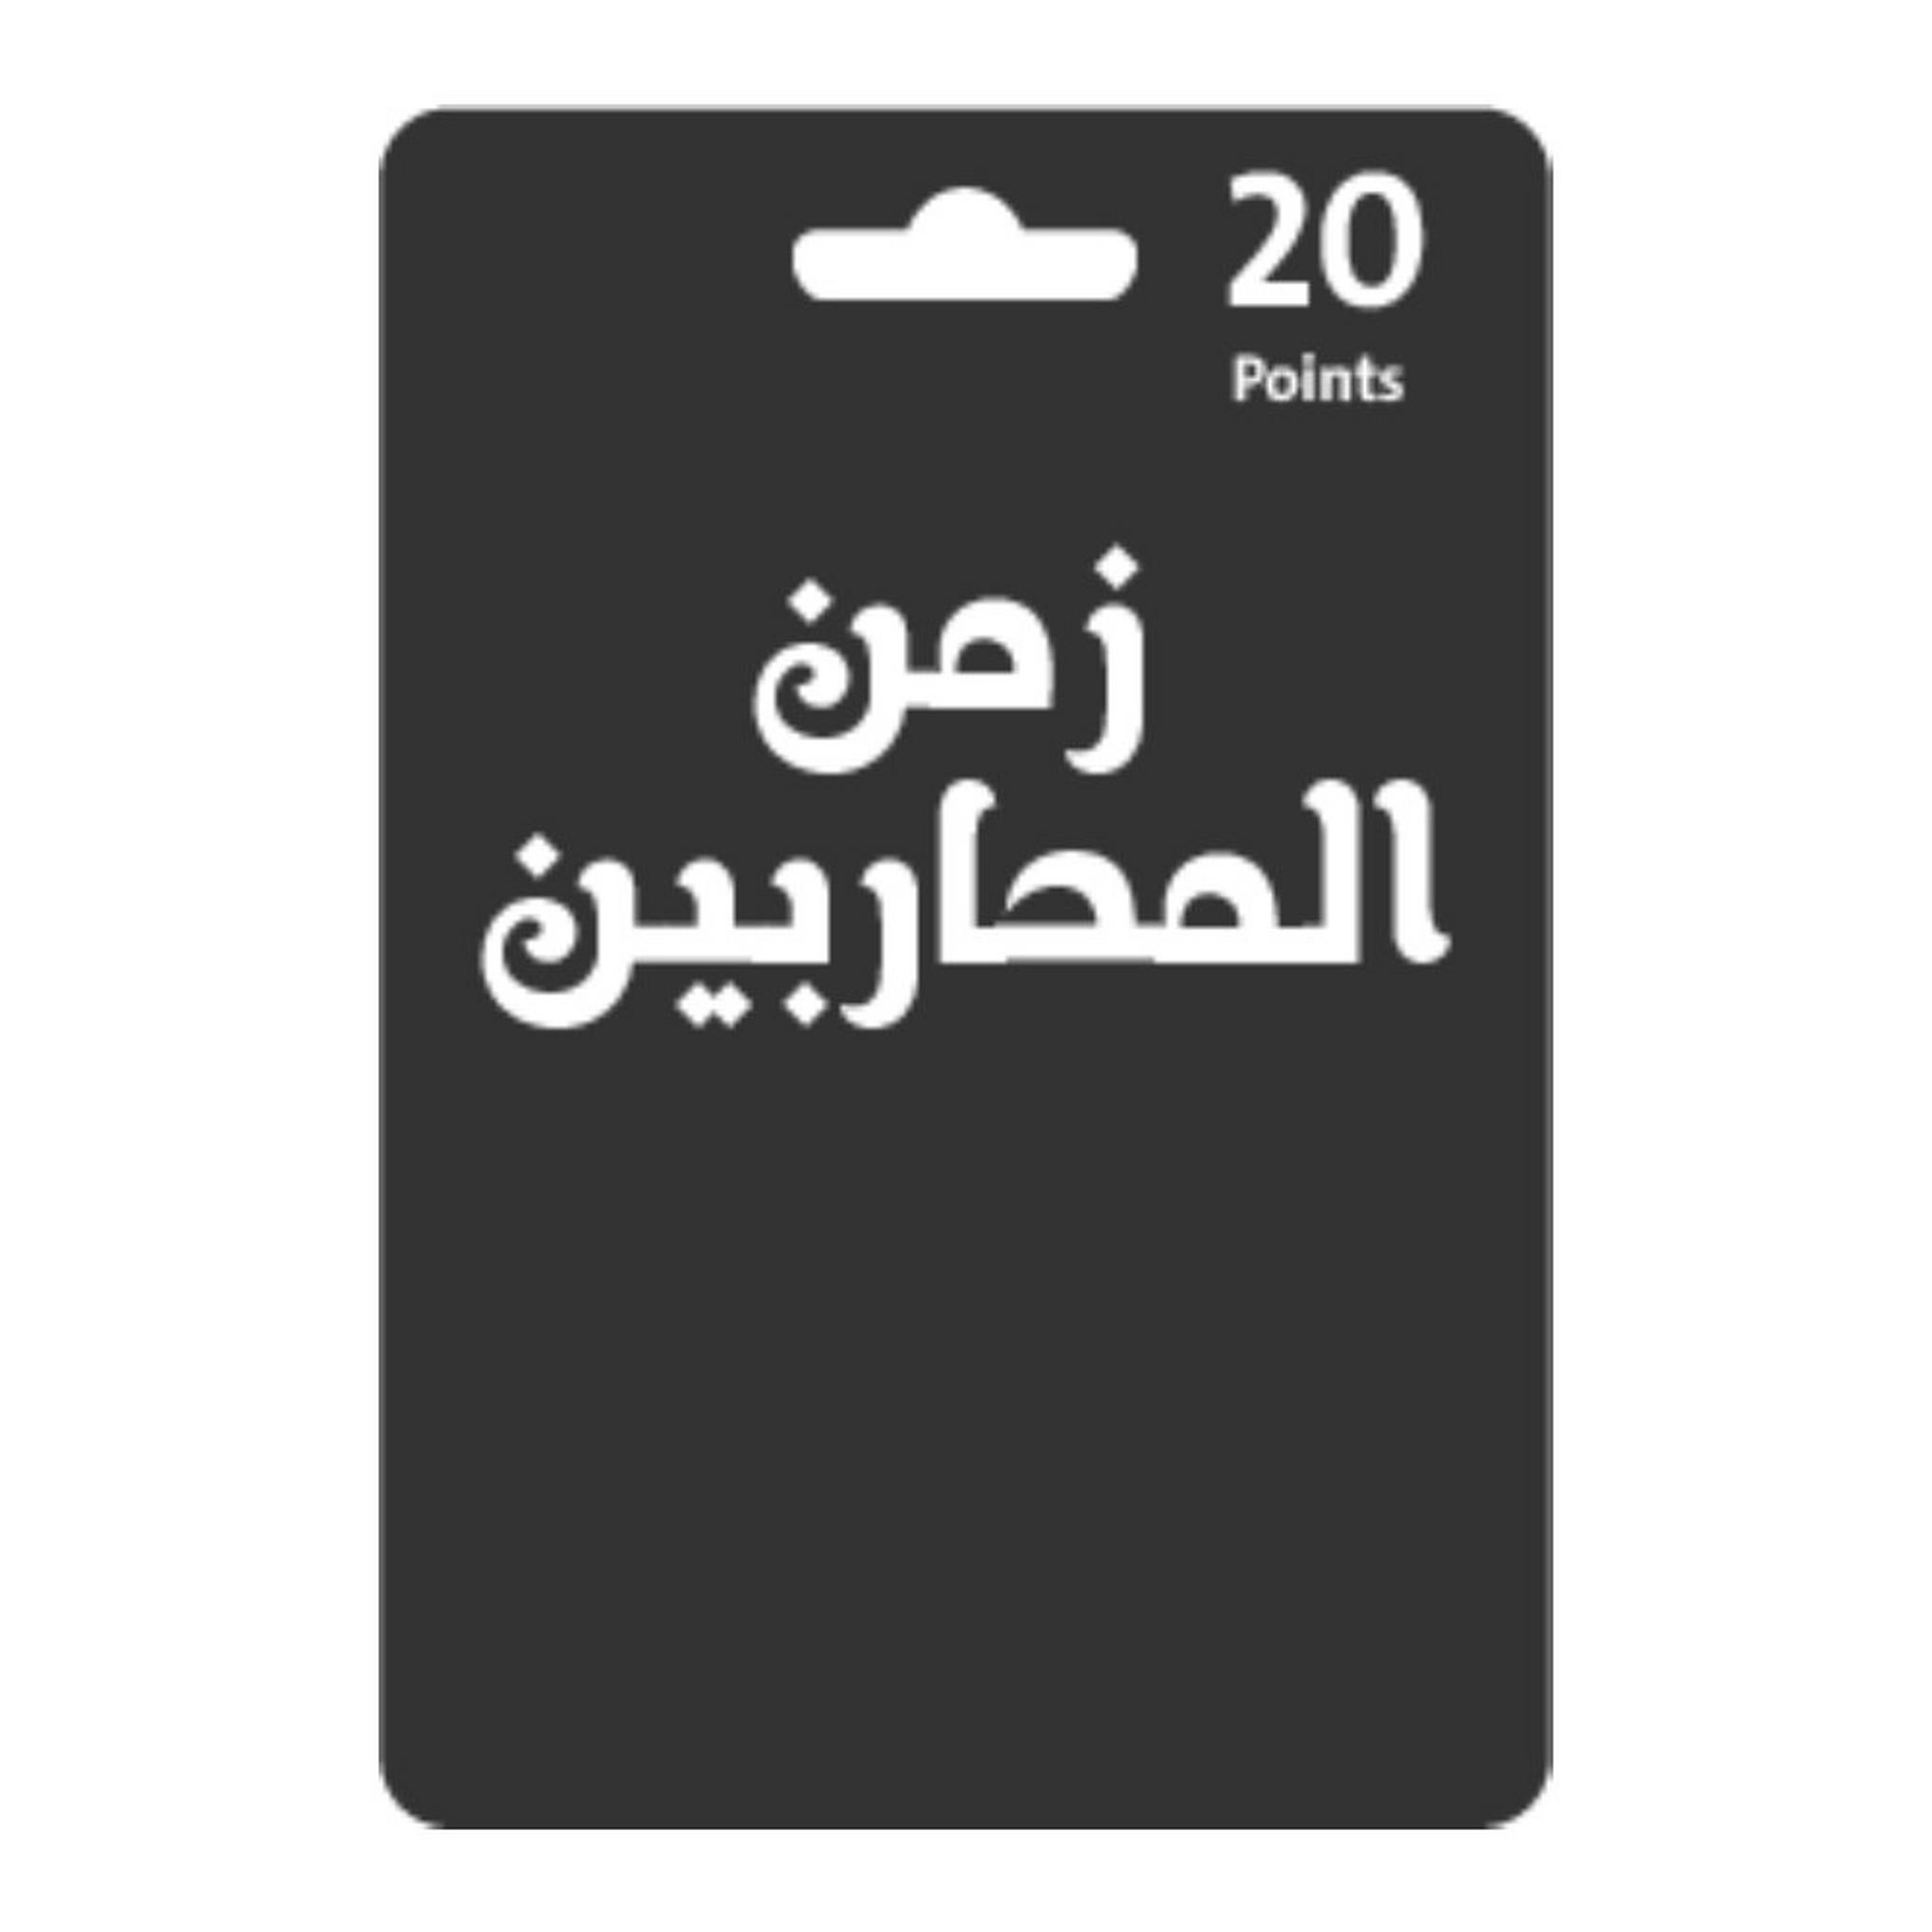 Zaman Almoharbeen 20 Points Card